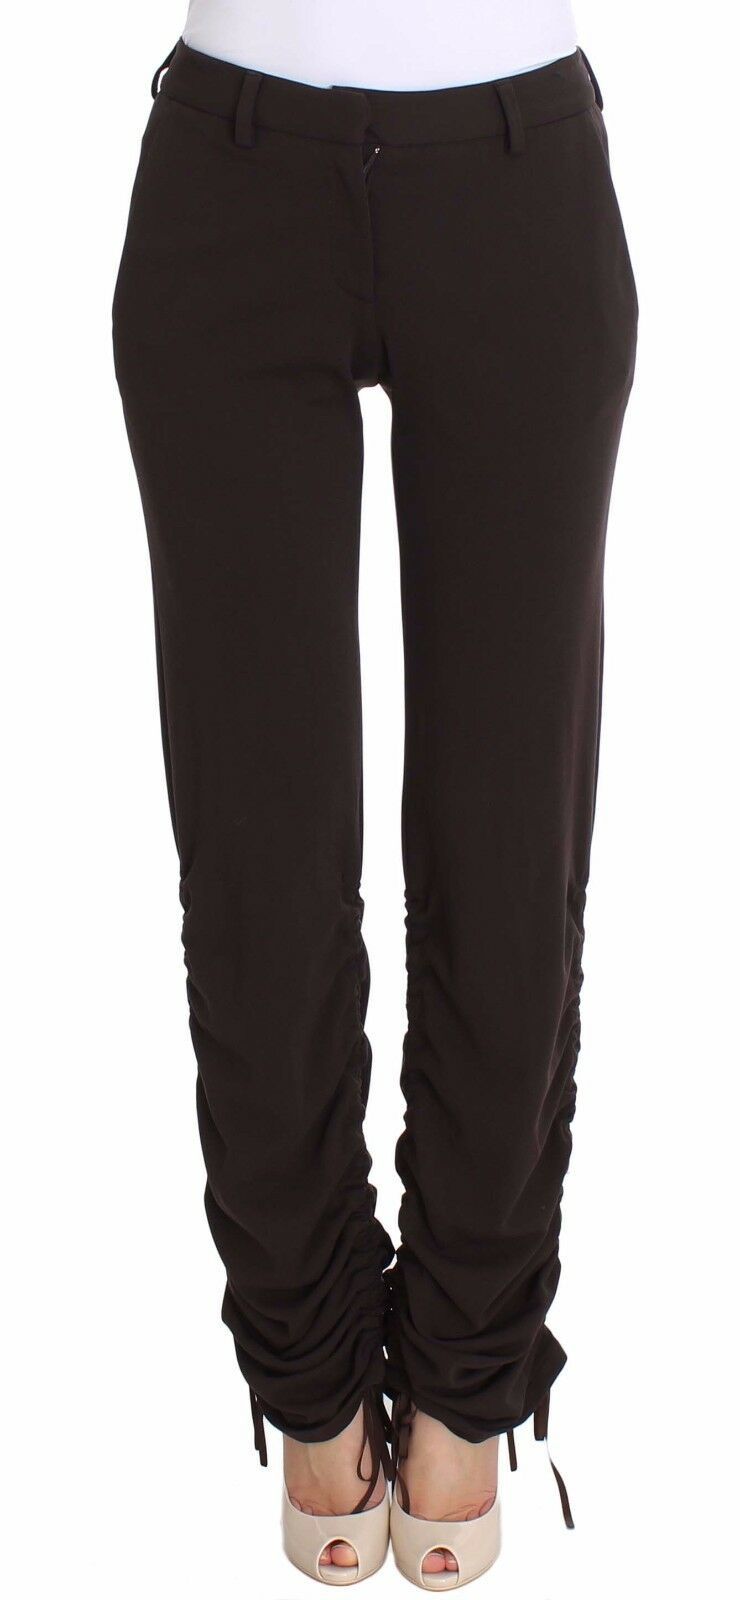 Chic Brown Casual Trousers for Sophisticated Style